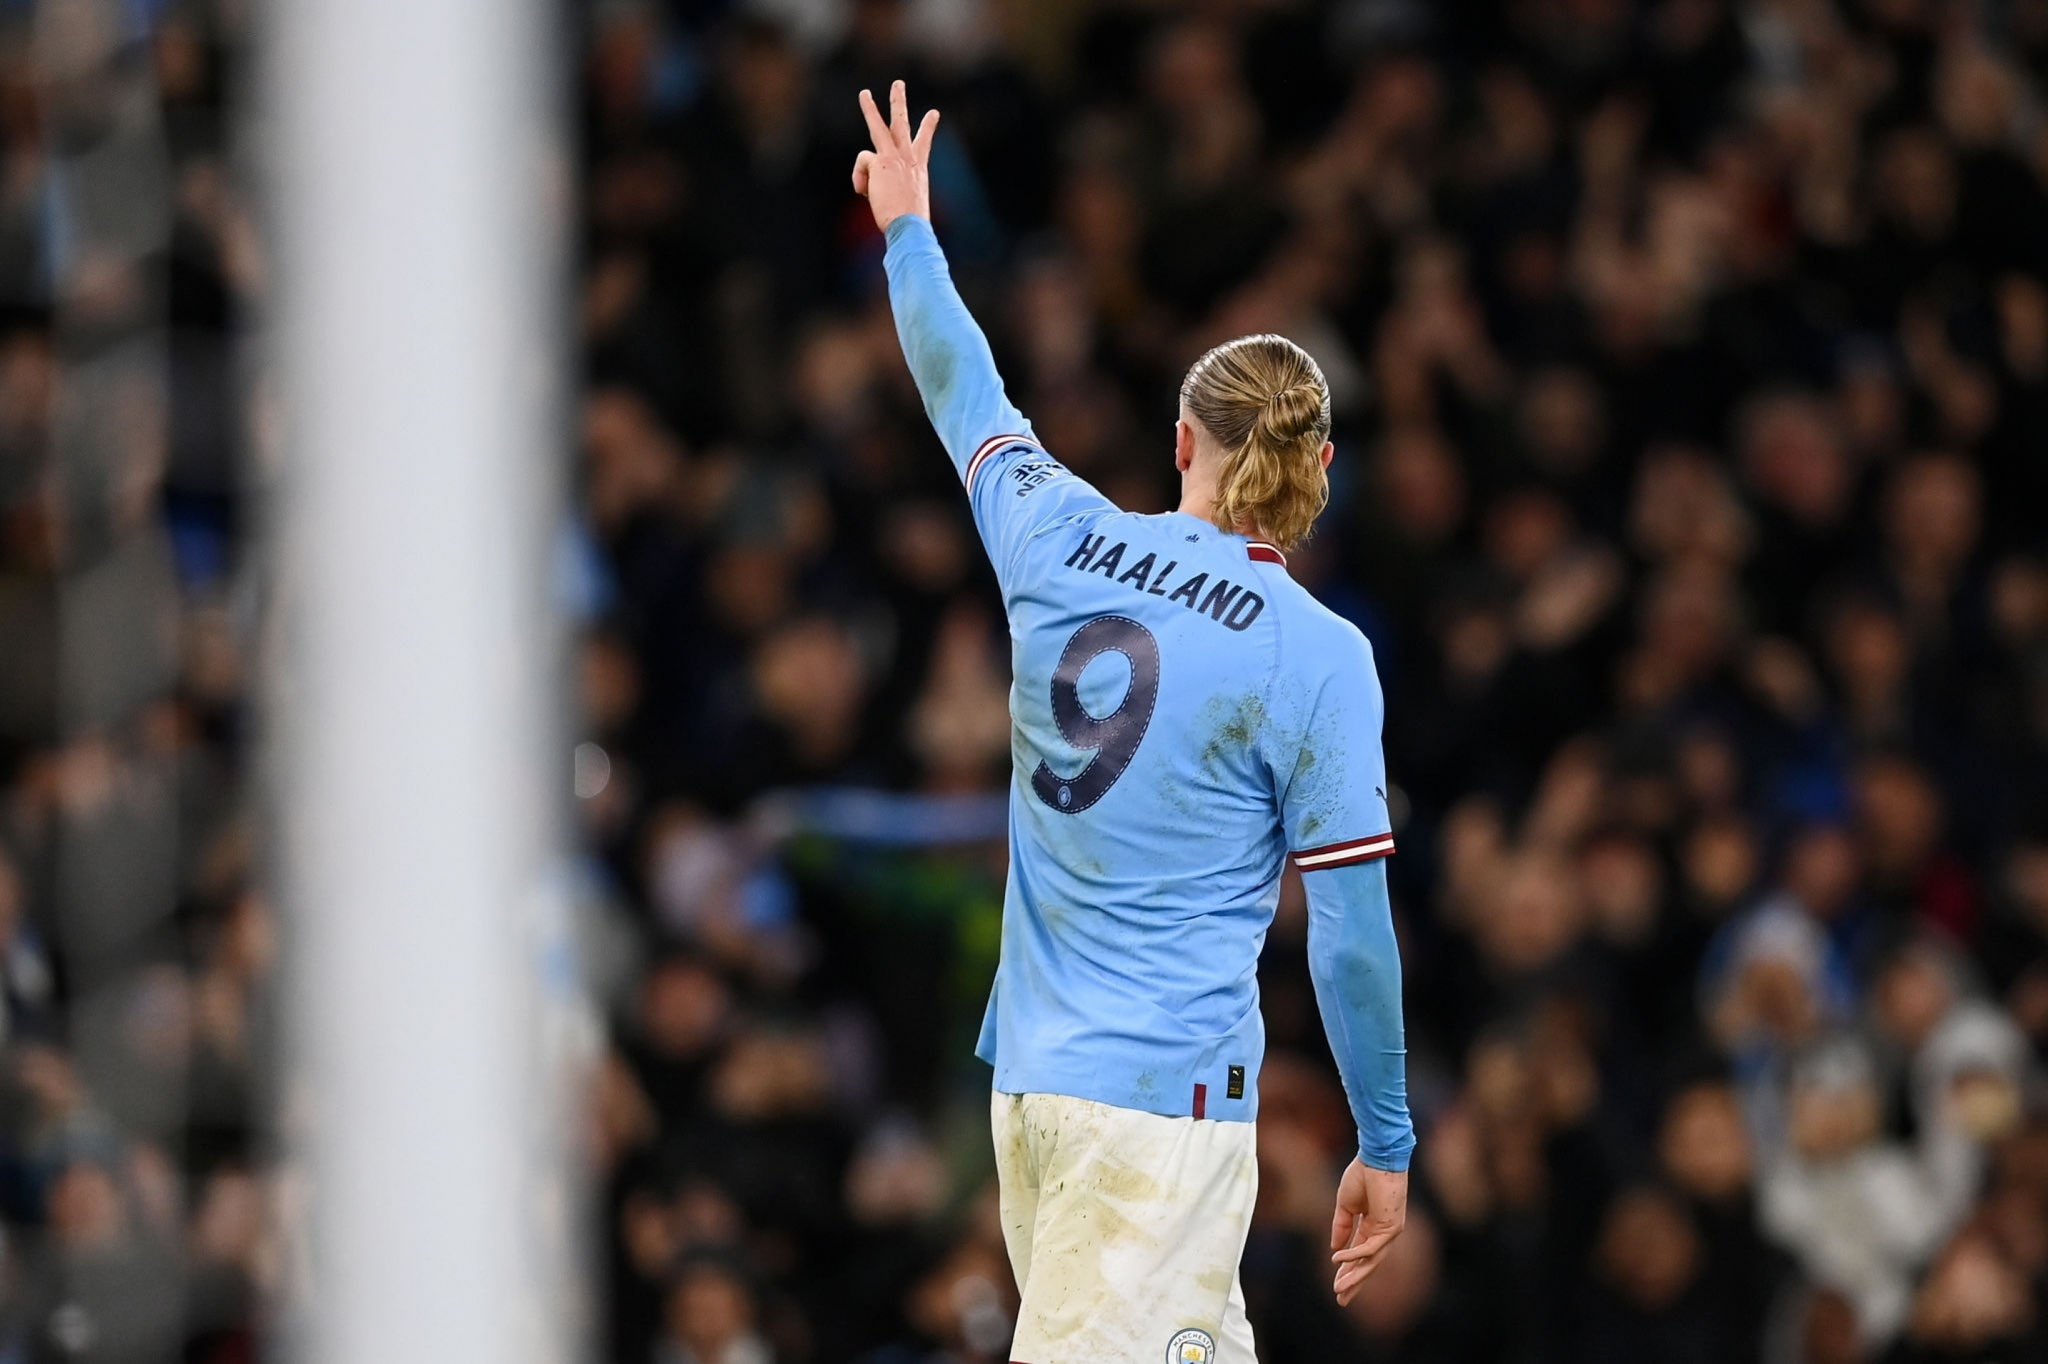 Haaland New Contract: Manchester City SET to REWARD star striker with Bumper offer, offers £500k a week, Premier League LIVE, Erling Haaland New Contract